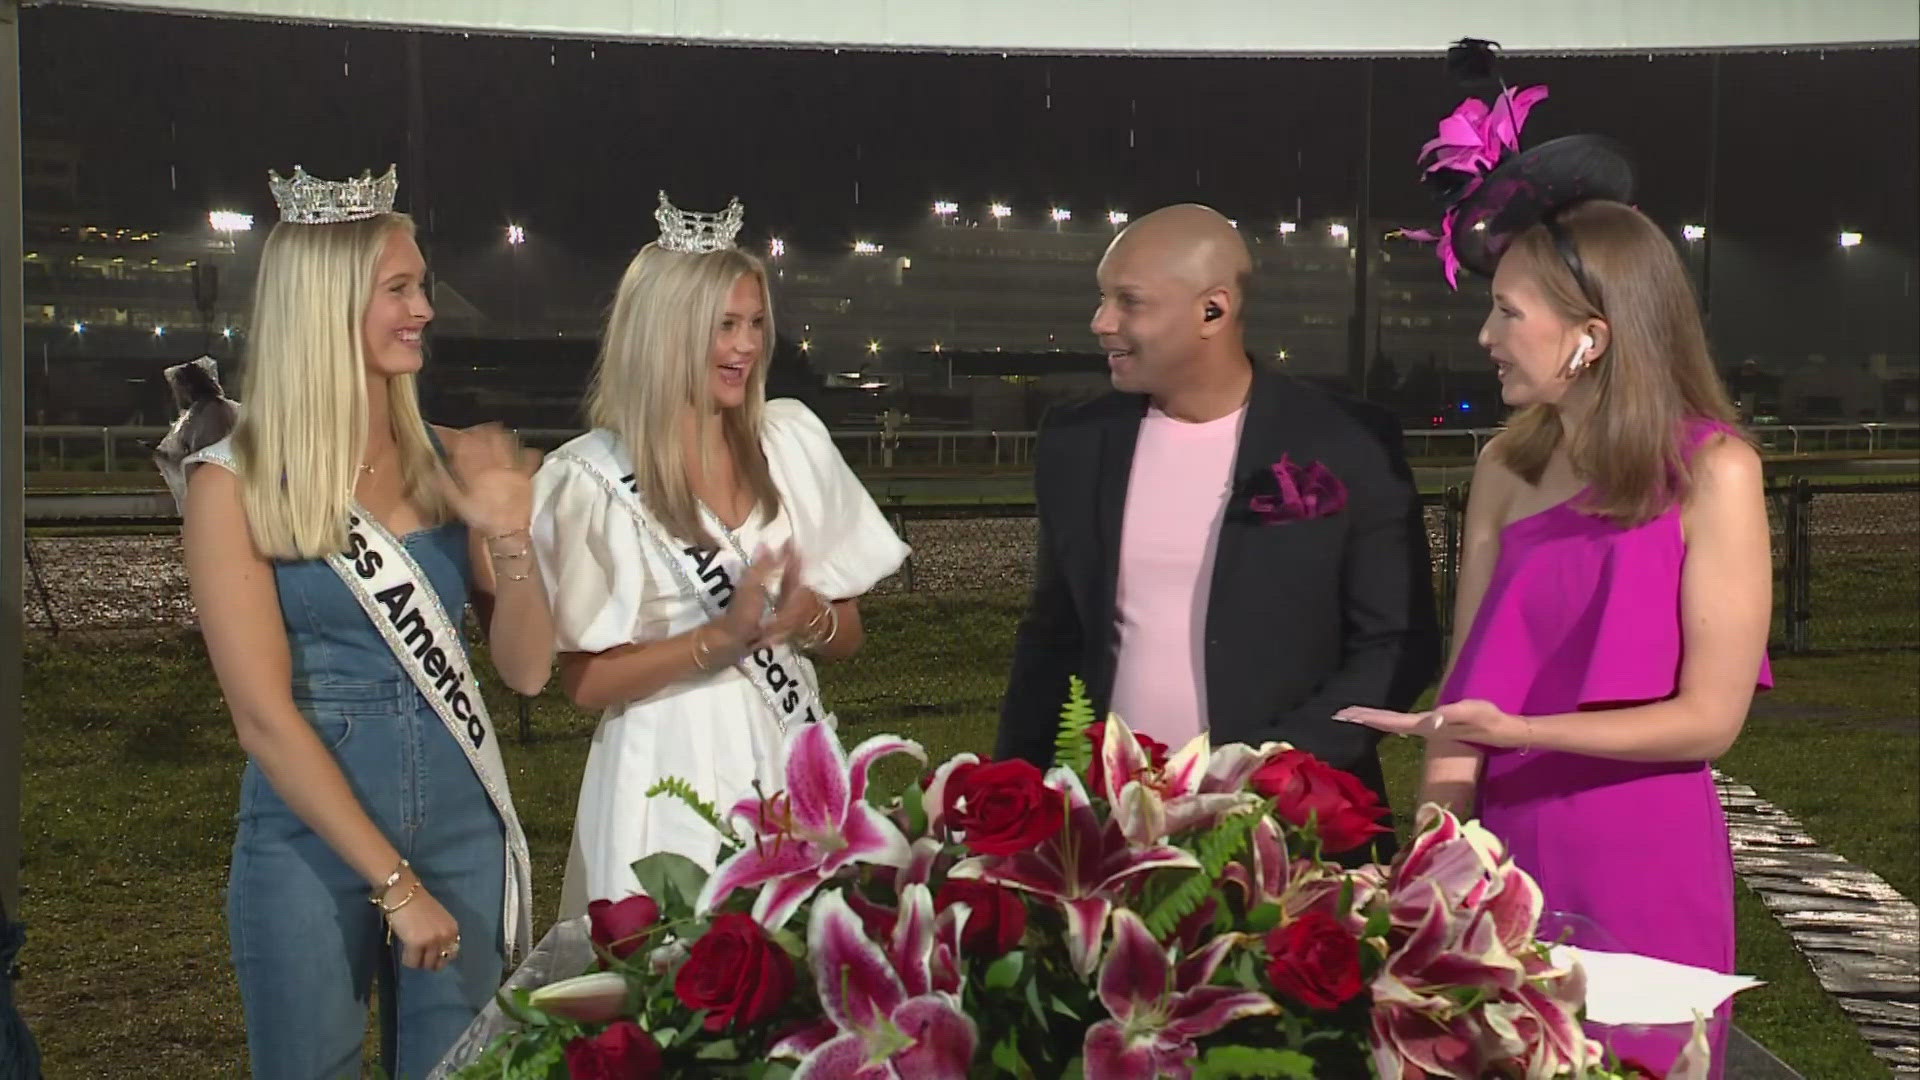 WHAS11 interviews Miss America Madison Marsh and Miss America's Teen Hanley House at Churchill Downs.